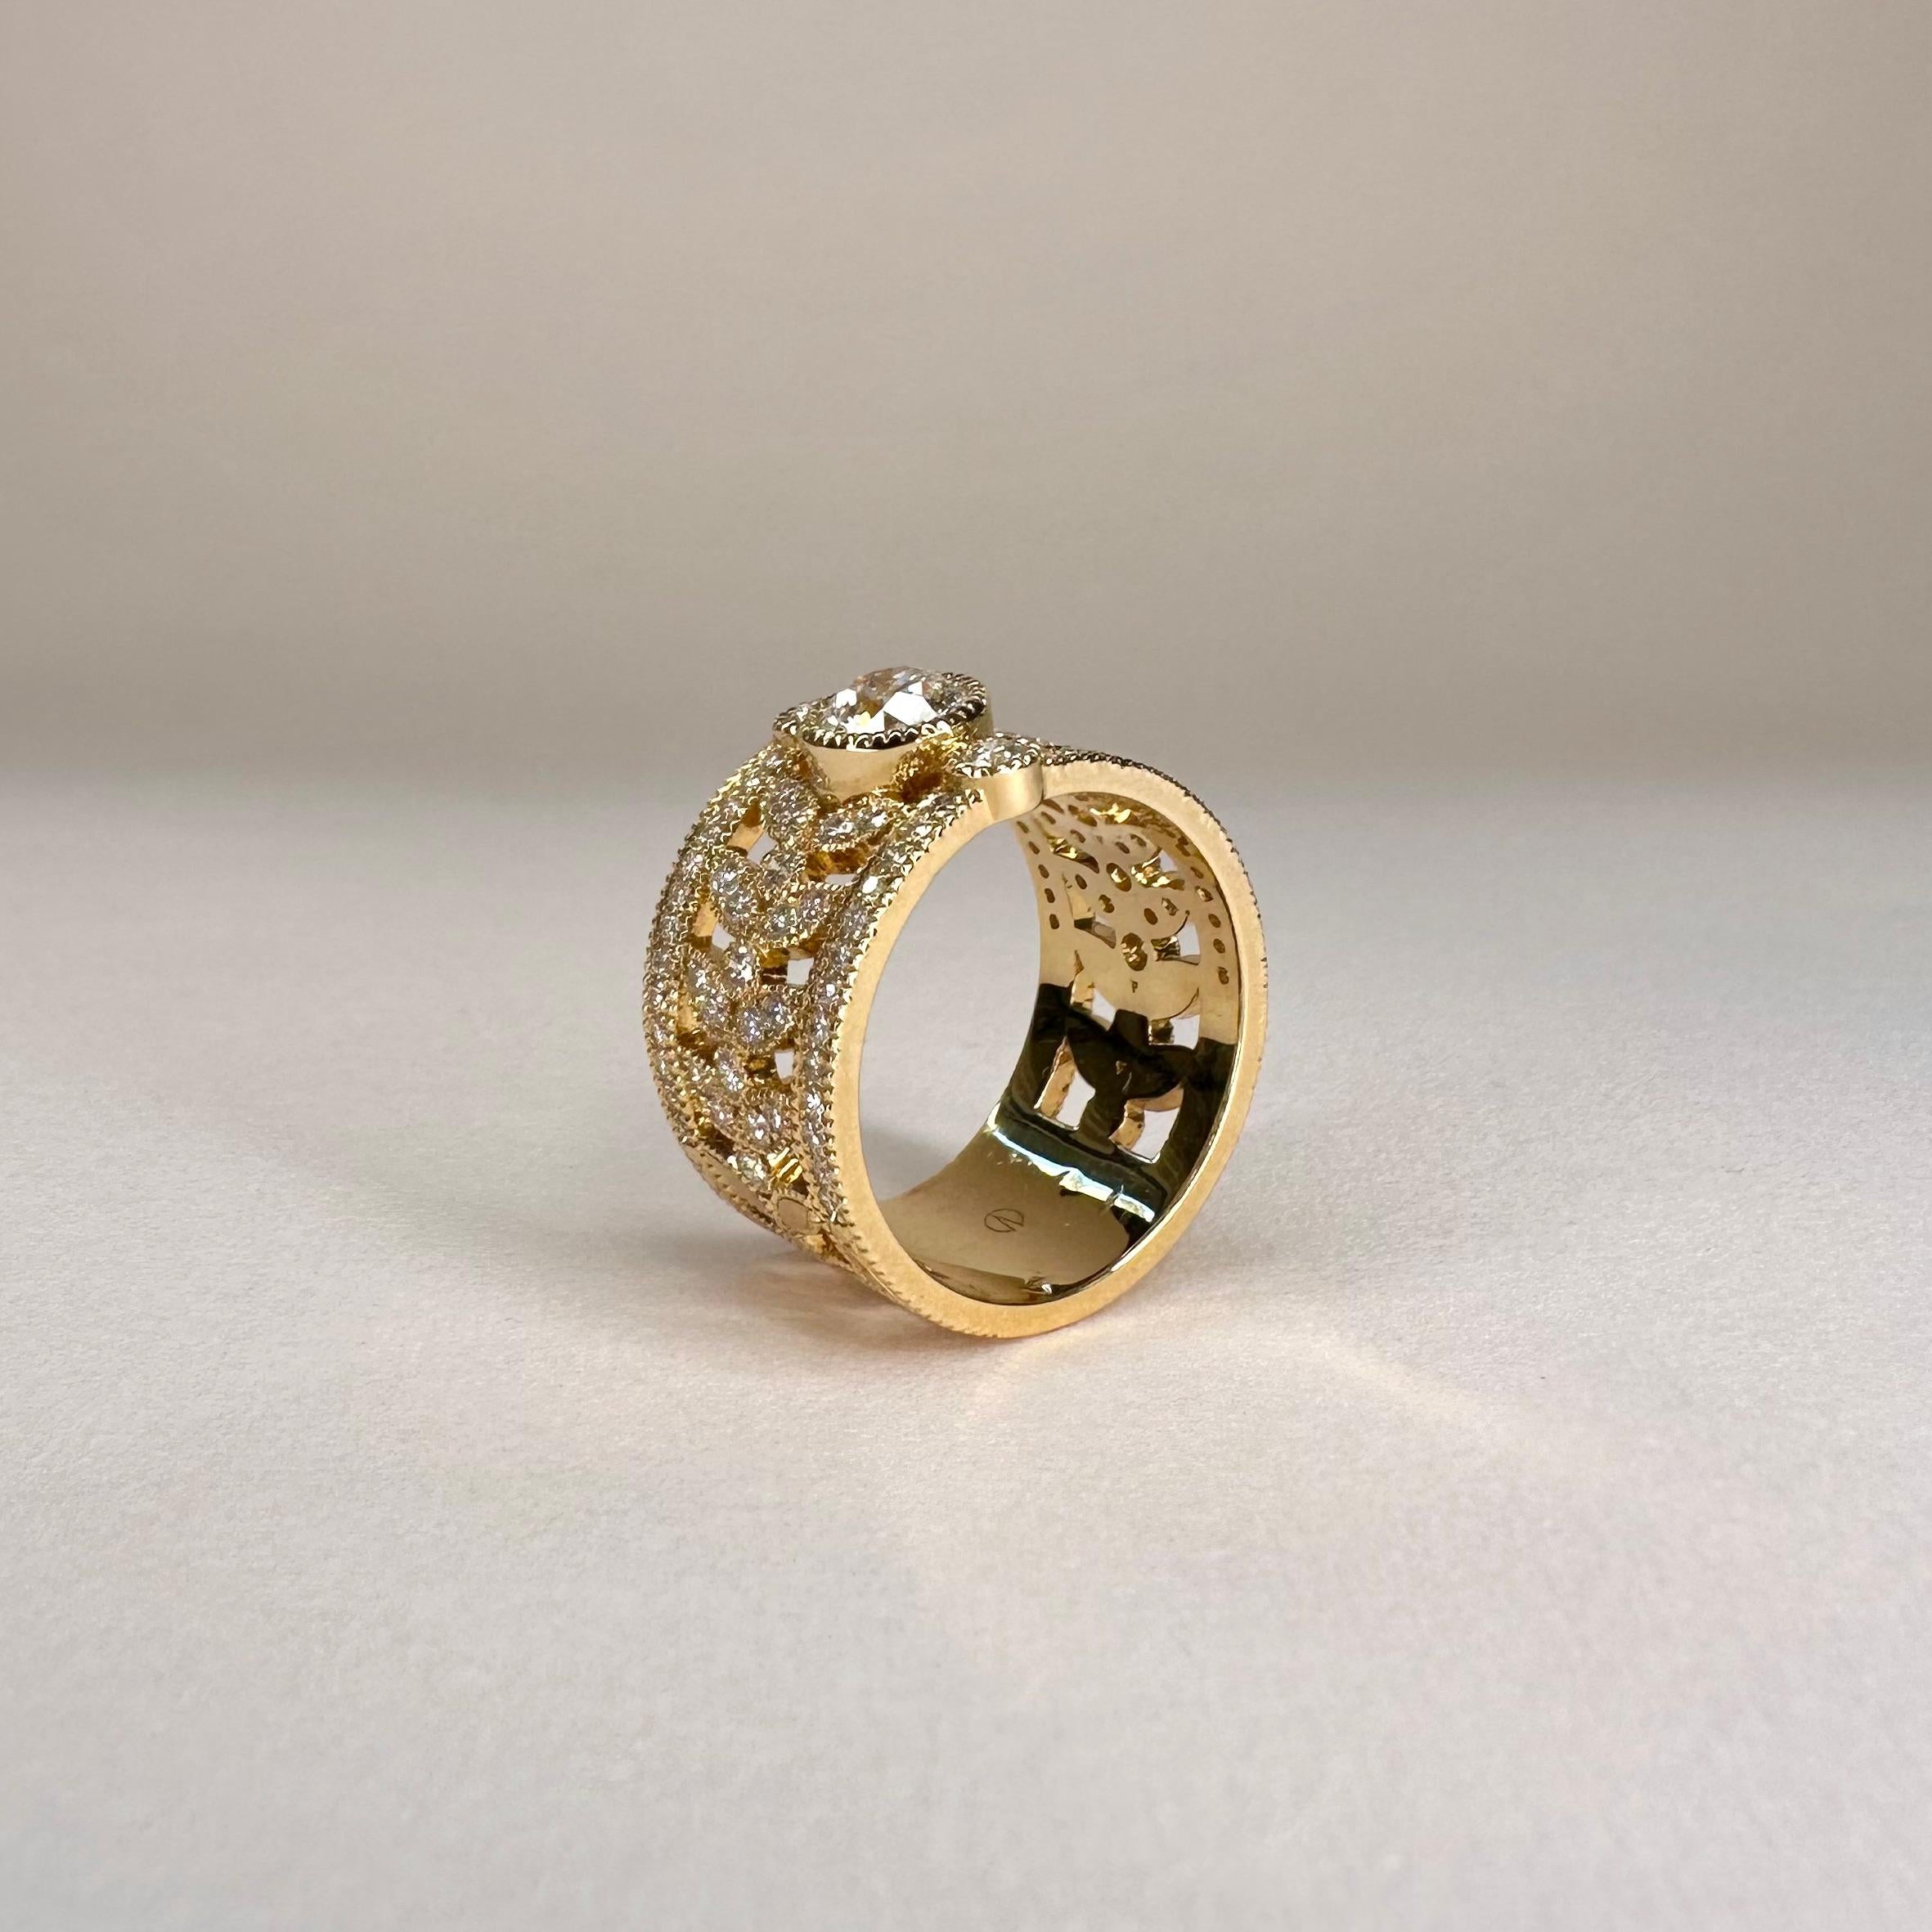 For Sale:  18k Yellow Gold Band Ring 0.70 Carat Diamond GIA Certified and 1 Cts of Diamonds 6